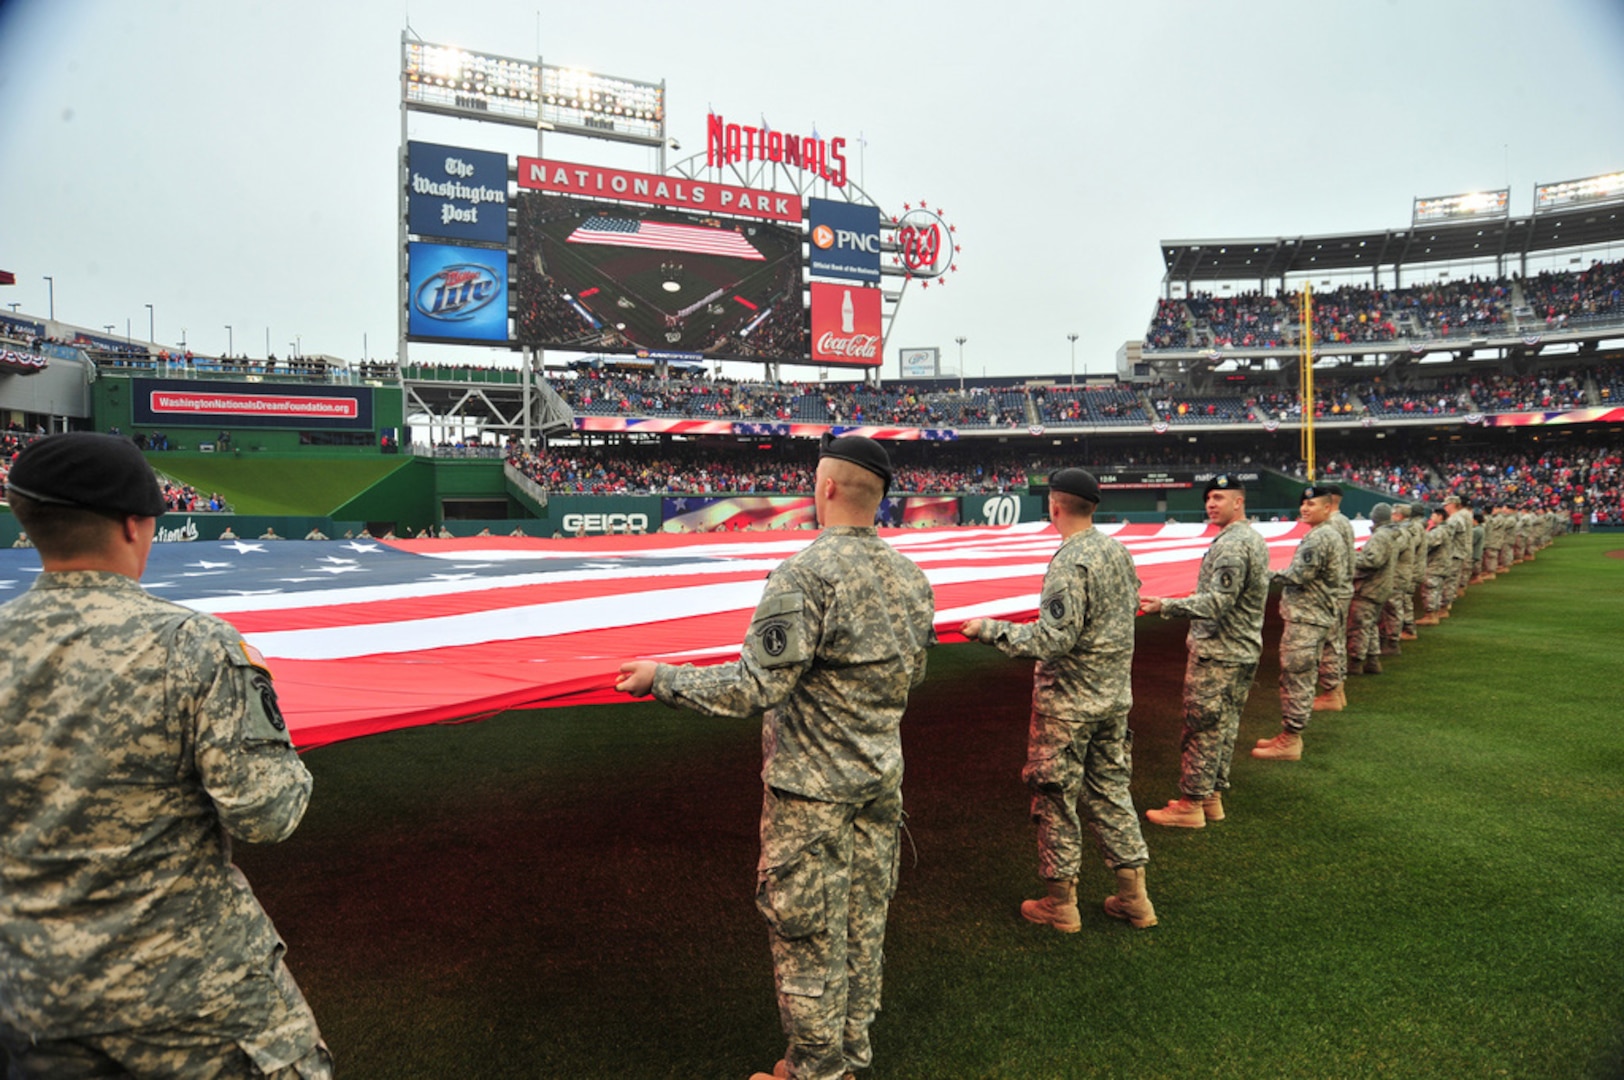 Members of the D.C. National Guard hold a football-field sized American flag on the outfield during pre-game ceremonies for Opening Day at Nationals Park in Washington, D.C. March 31, 2011.